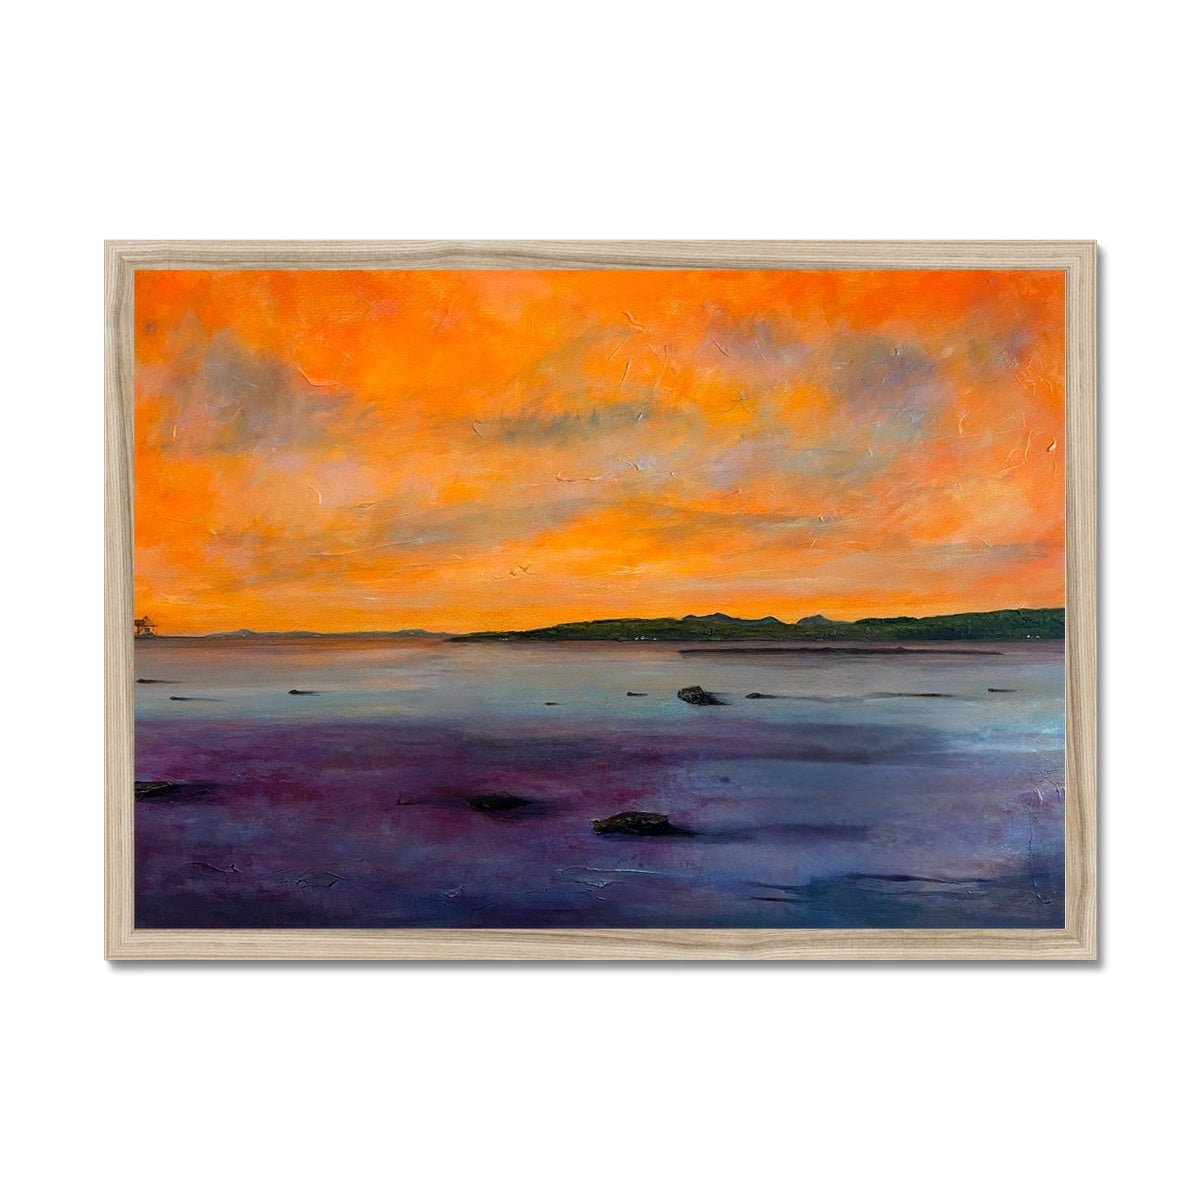 Looking From Largs Painting | Framed Prints From Scotland-Framed Prints-River Clyde Art Gallery-A2 Landscape-Natural Frame-Paintings, Prints, Homeware, Art Gifts From Scotland By Scottish Artist Kevin Hunter